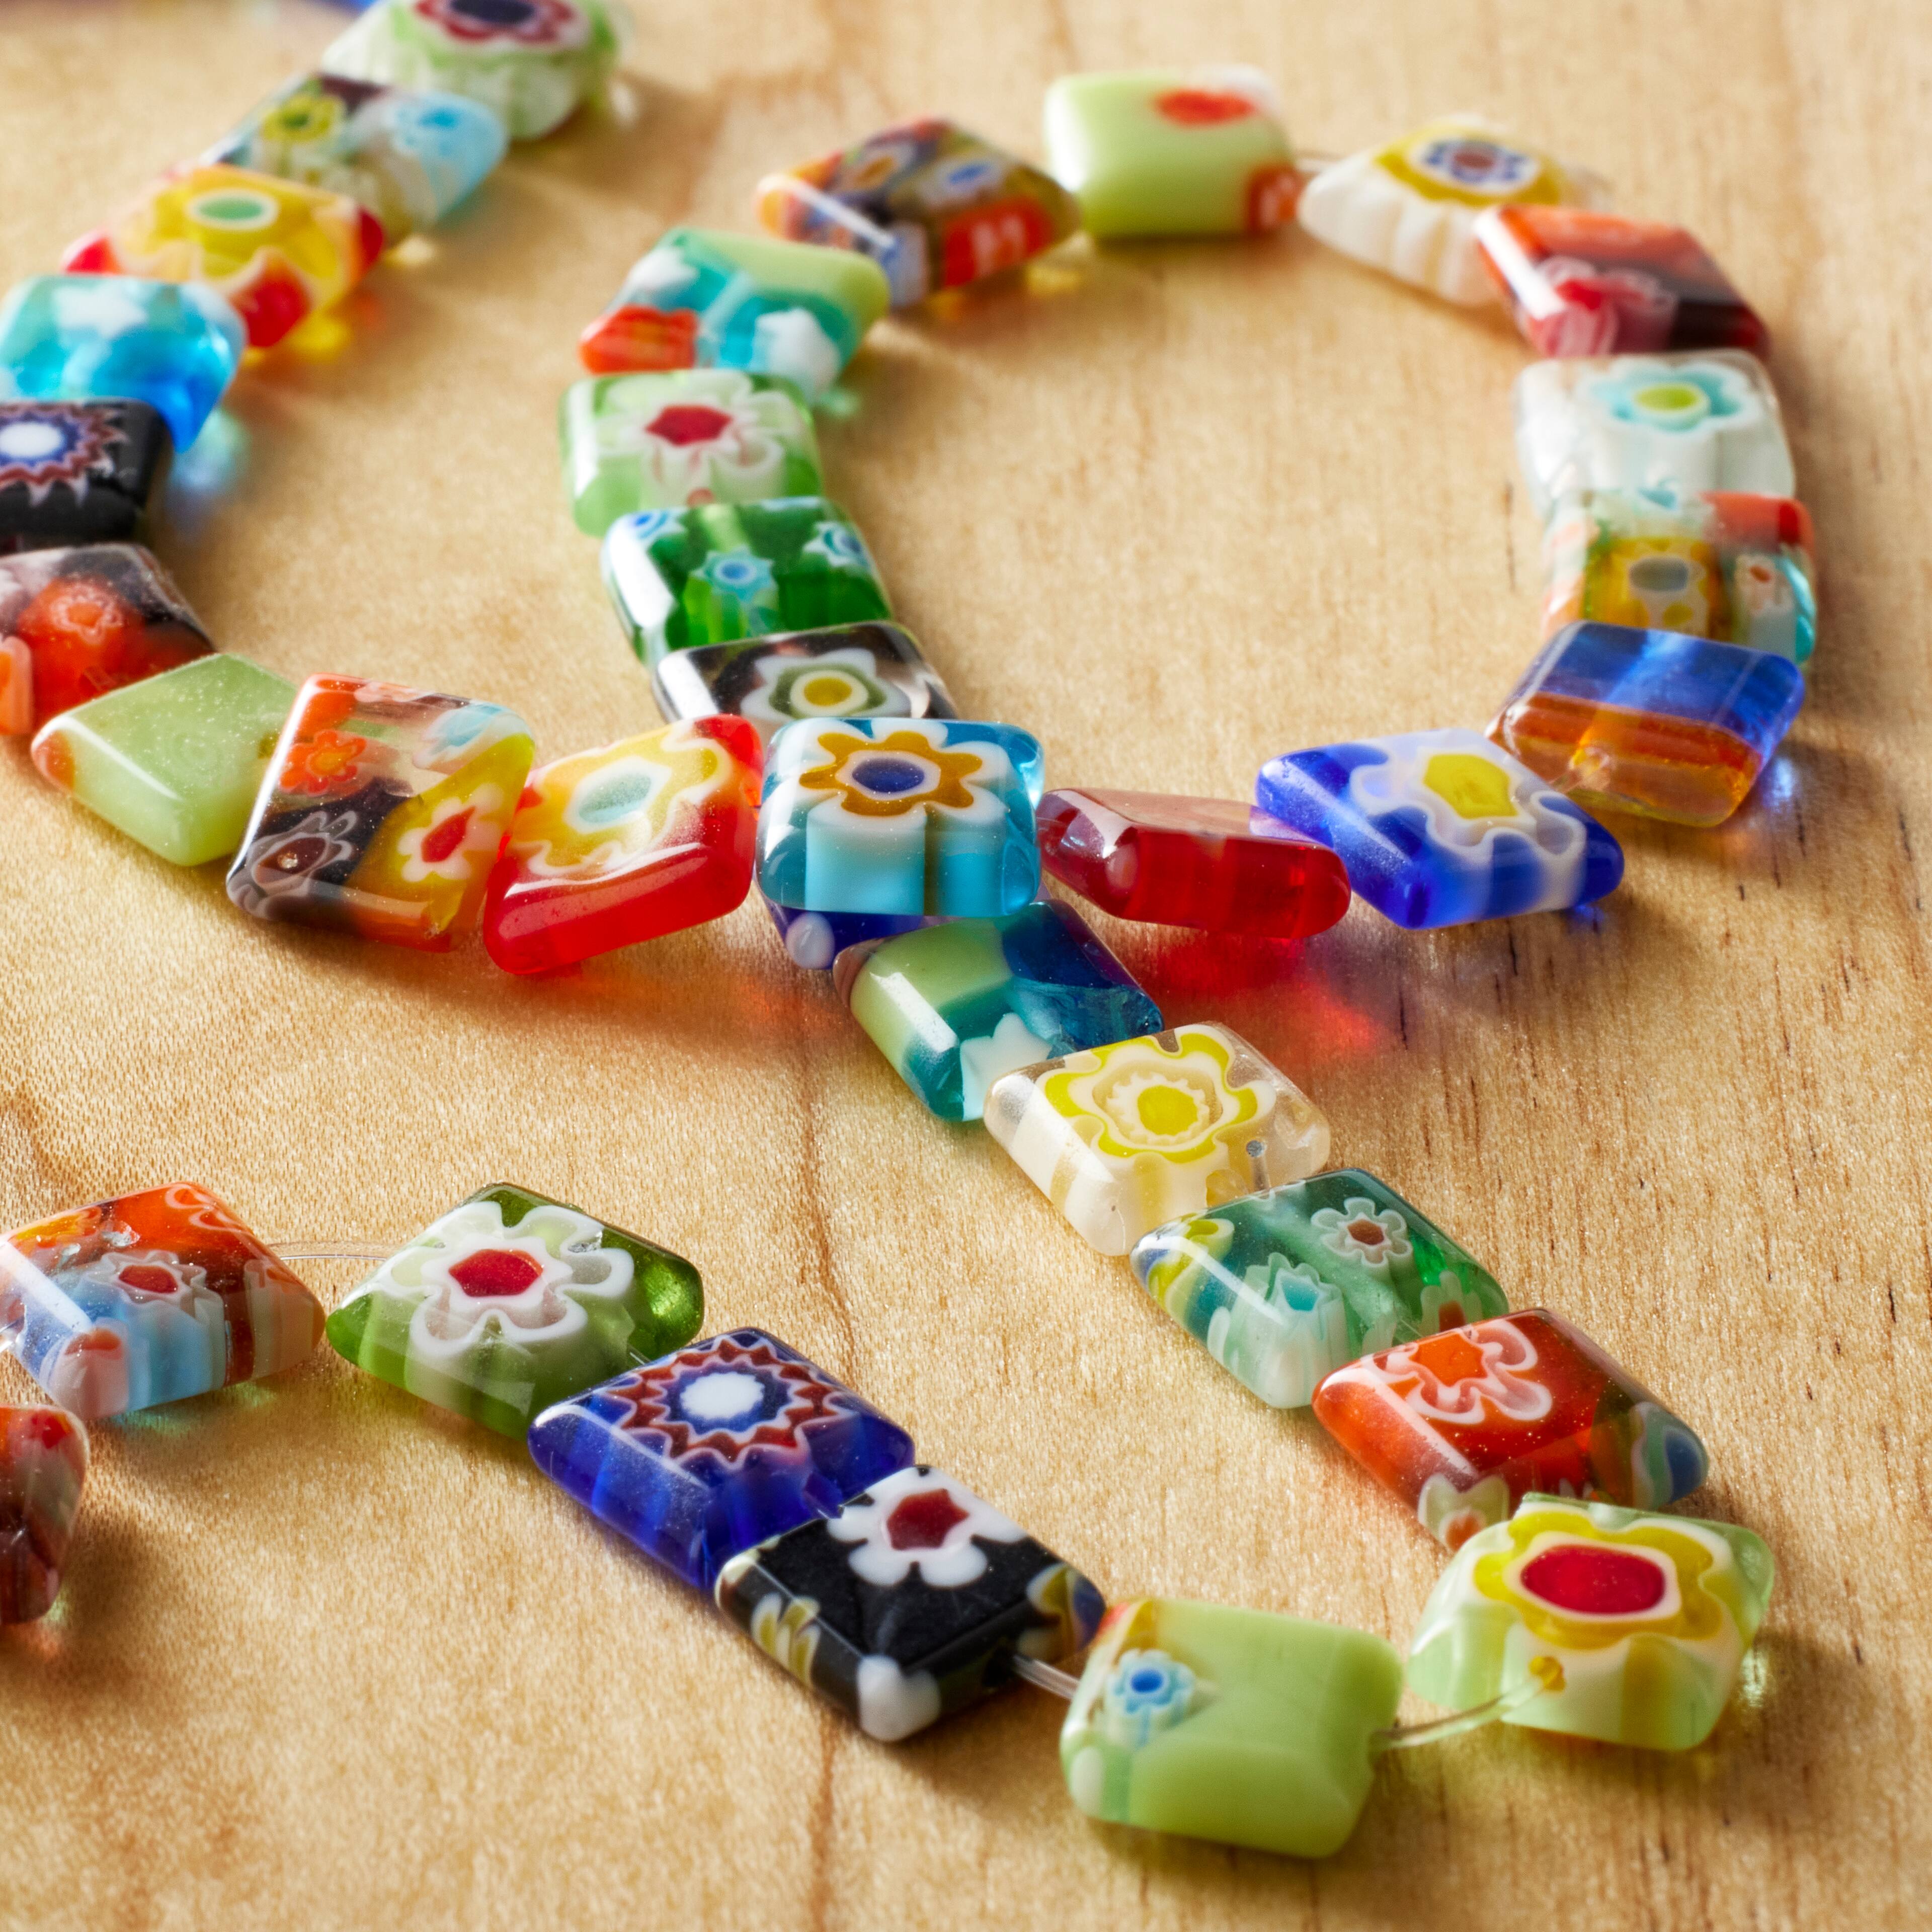 Multicolor Small Glass Beads, 2mm by Bead Landing™